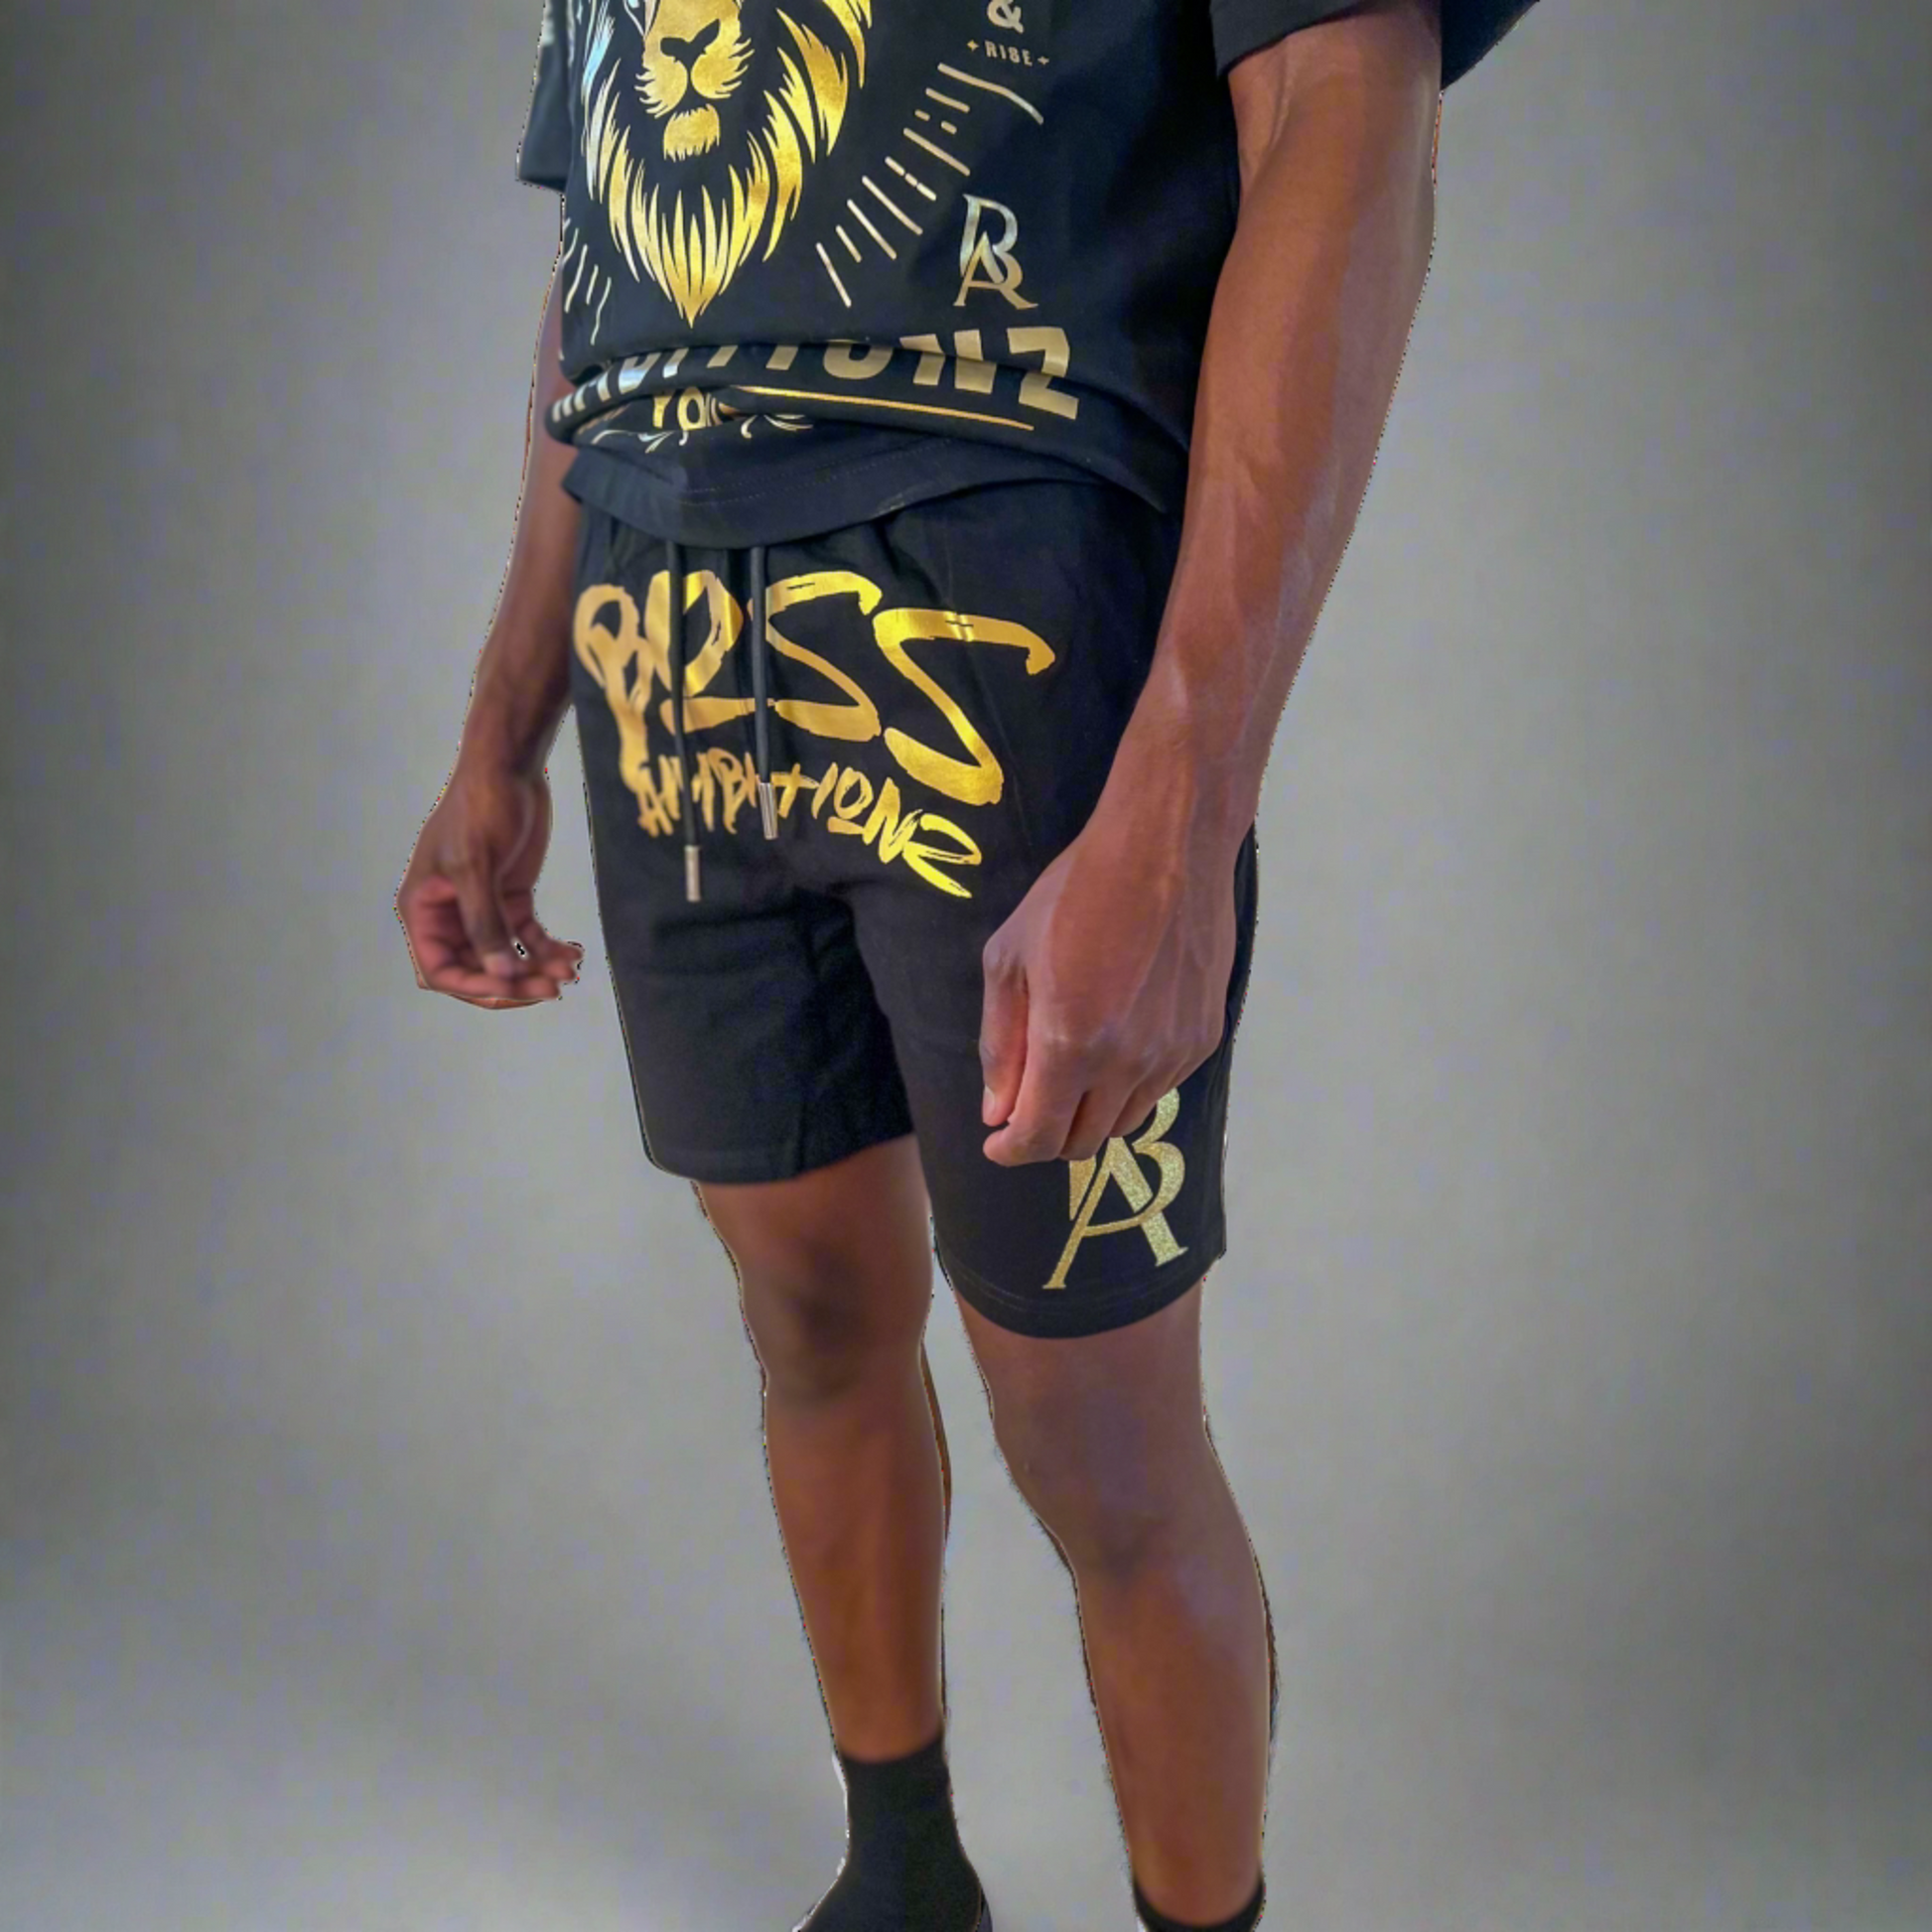 Close-up view of DaKidswagg in Boss Ambitionz shorts: "Close-up view of DaKidswagg wearing Boss Ambitionz shorts, highlighting the bold gold 'Boss Ambitionz' text and logo on the leg.